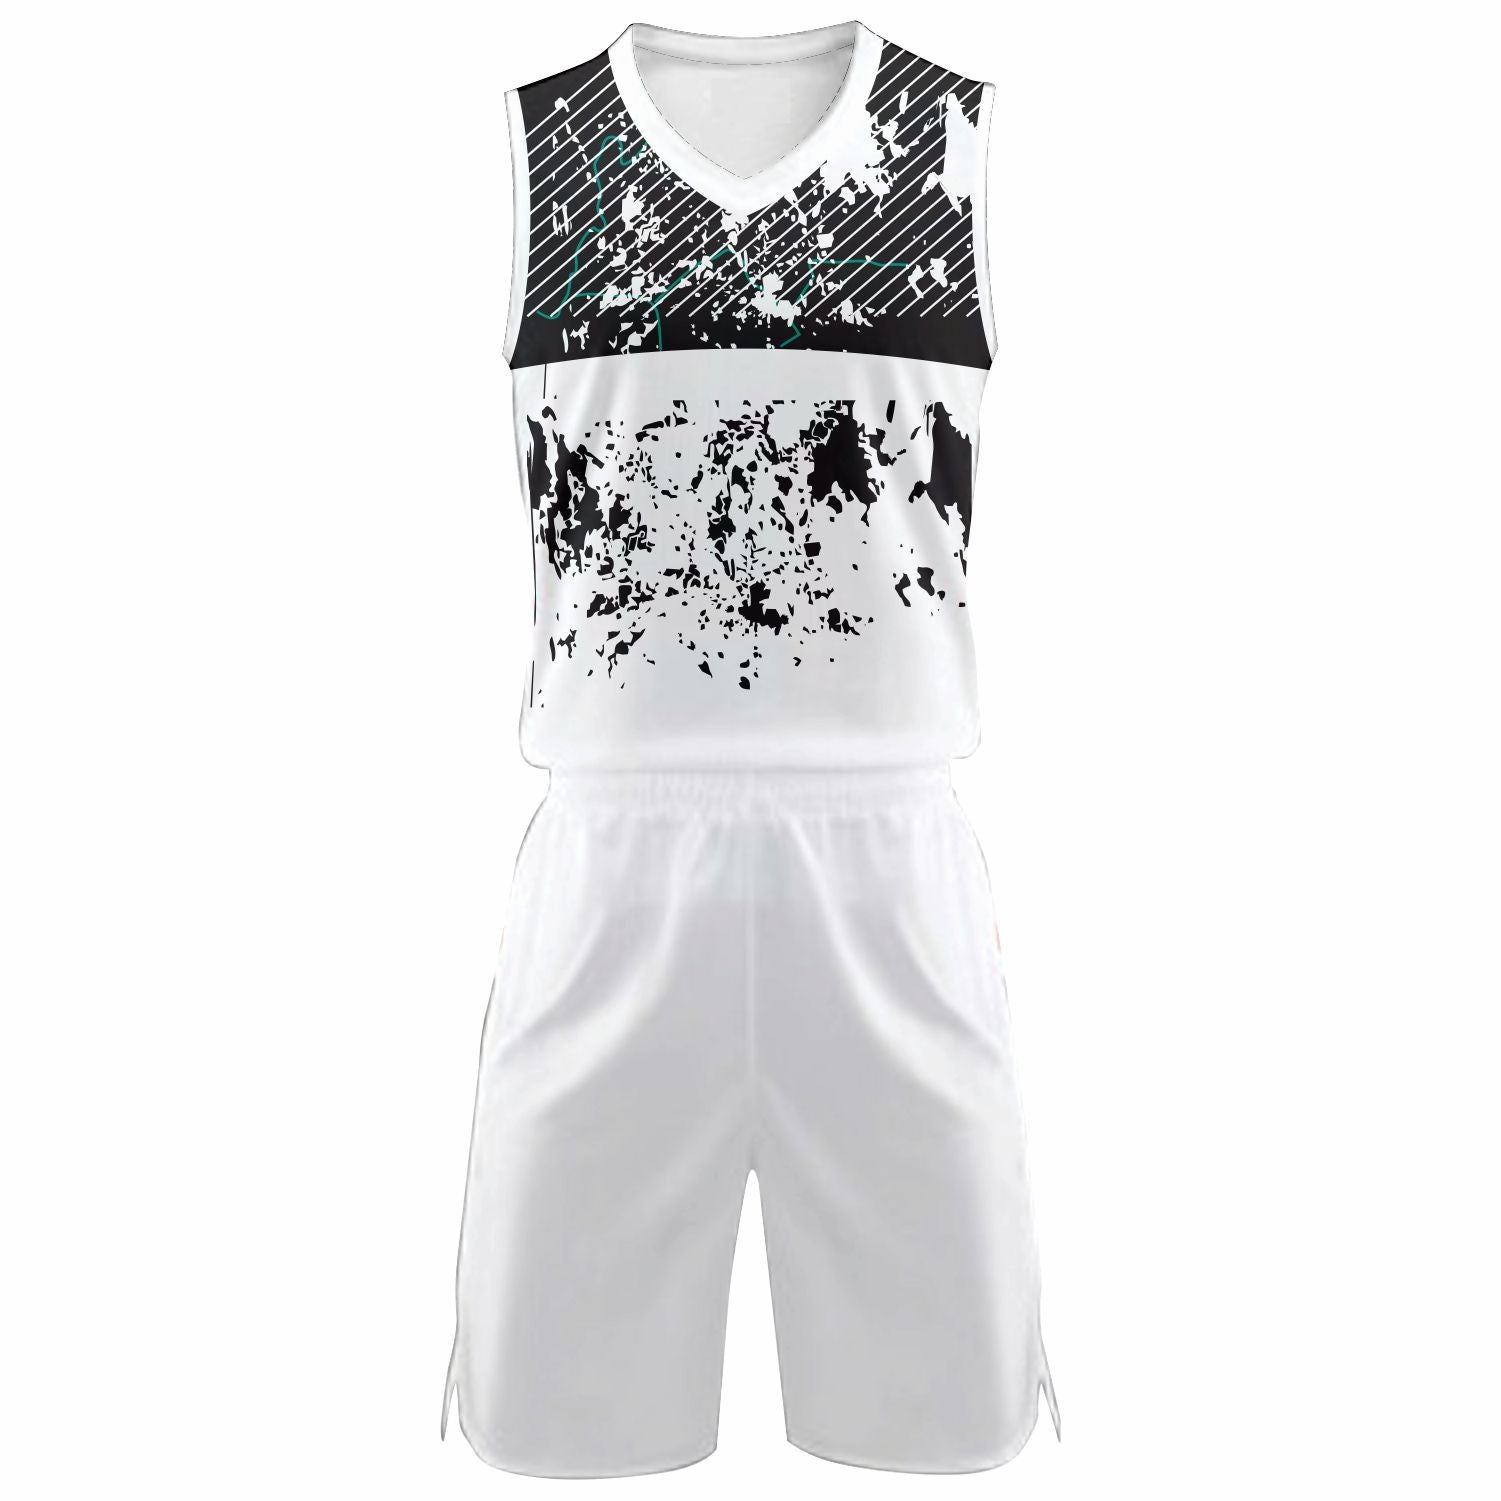 BASKETBALL SPURS 11 JERSEY FREE CUSTOMIZE OF NAME AND NUMBER ONLY full  sublimation high quality fabrics/ trending jersey